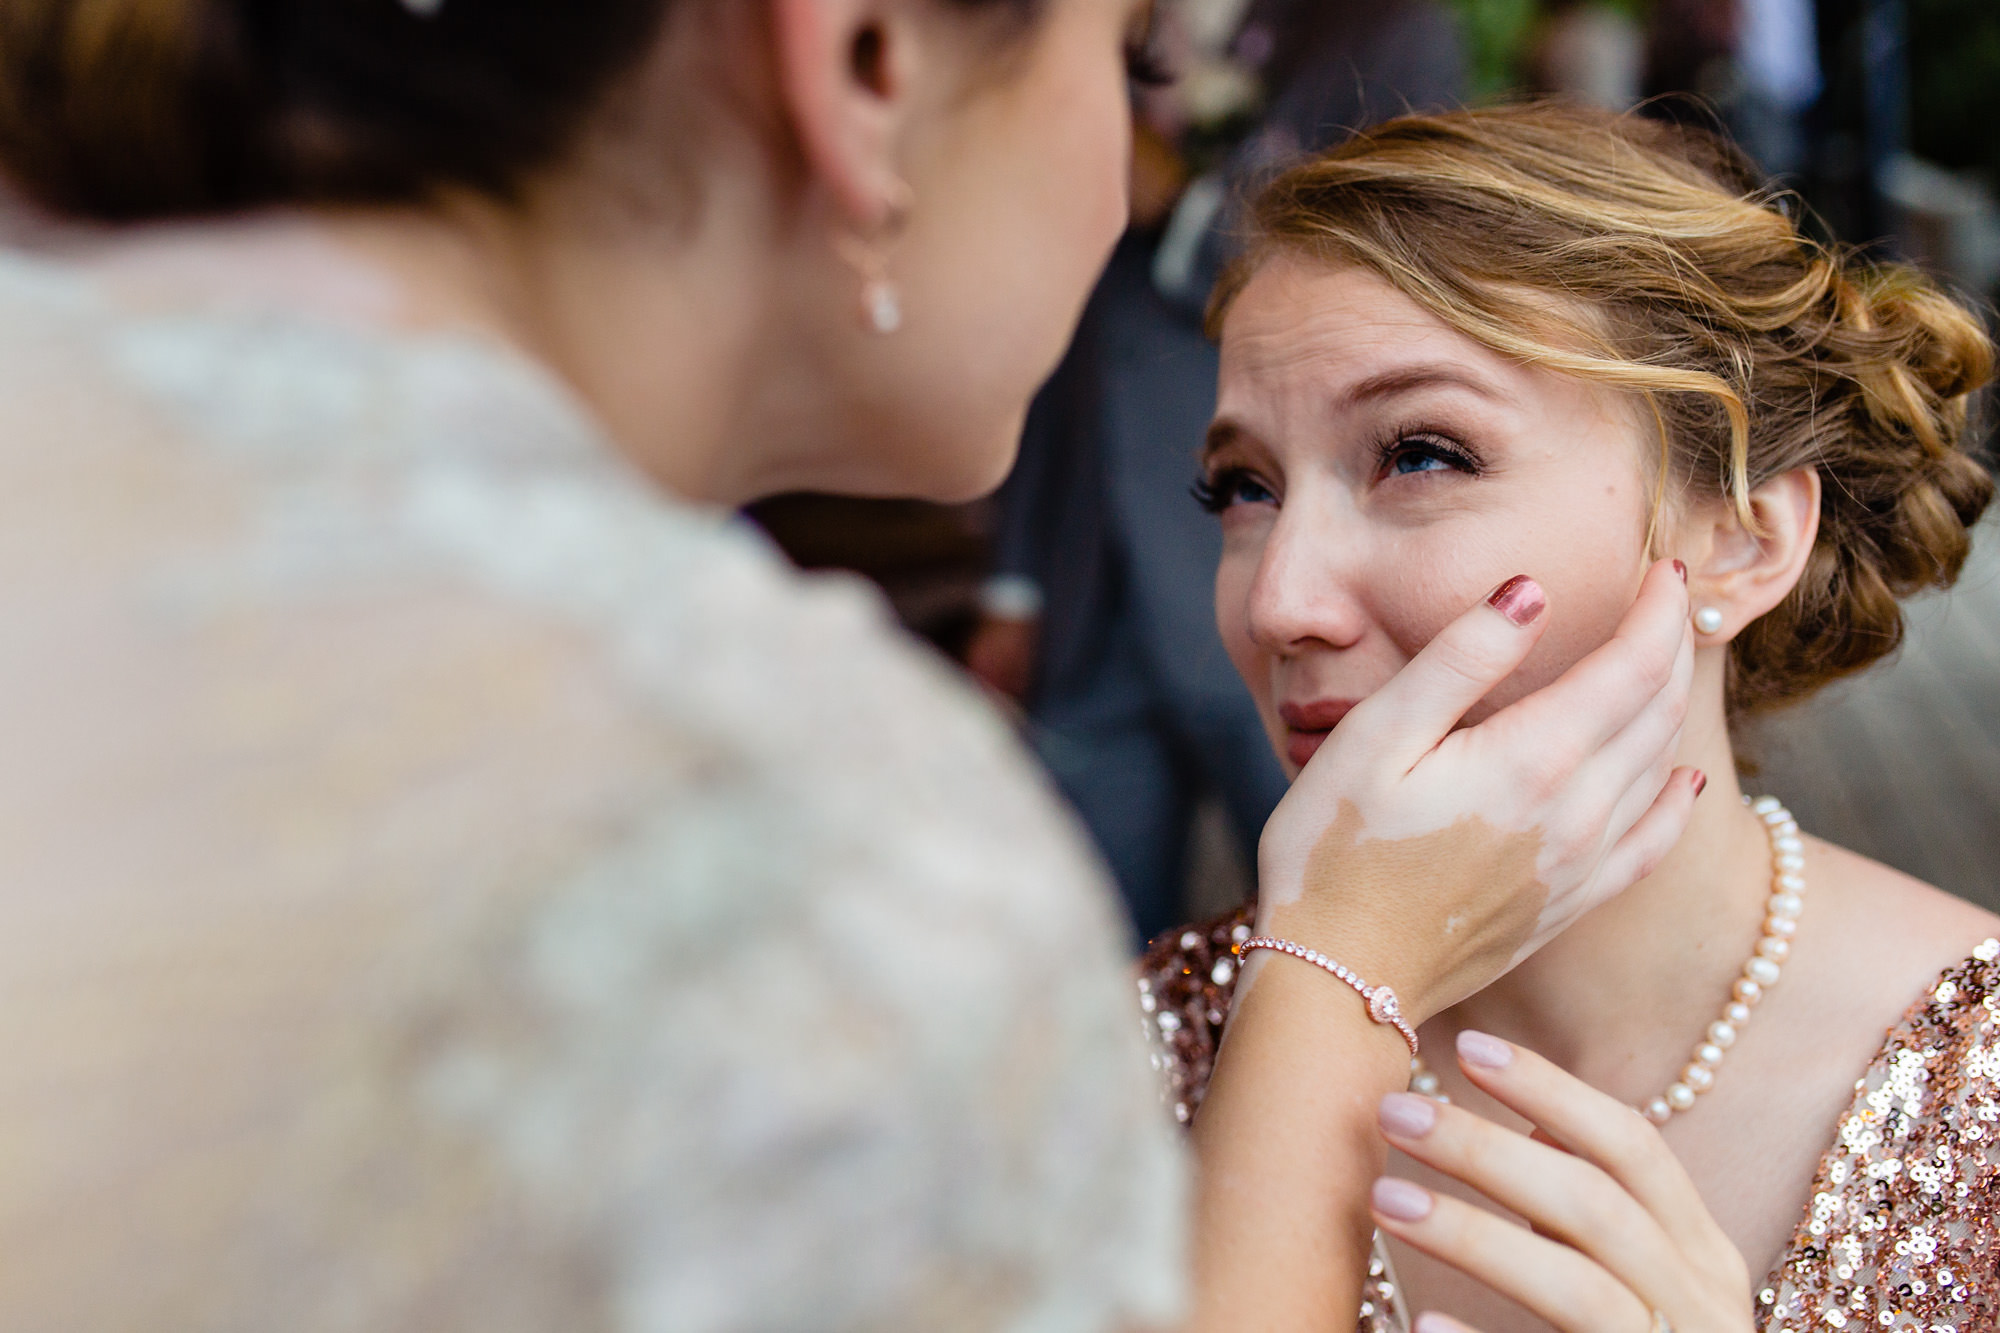 An emotional moment shared at a Maine wedding